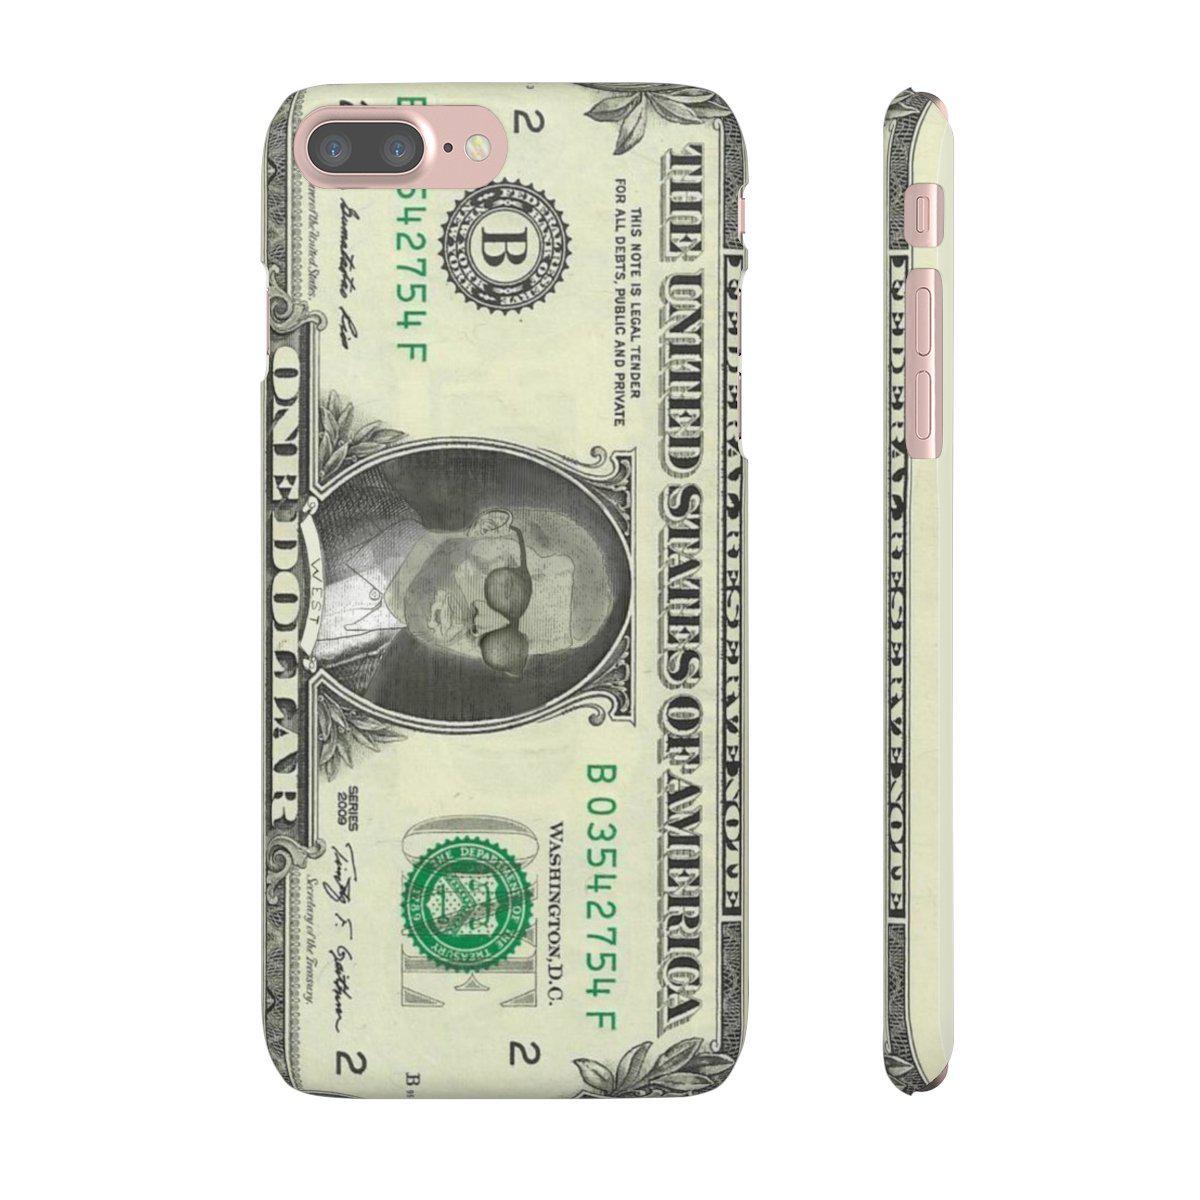 Kanye West President face on 1 dollar bill case iPhone Snap Case-iPhone 7 Plus-Matte-Archethype